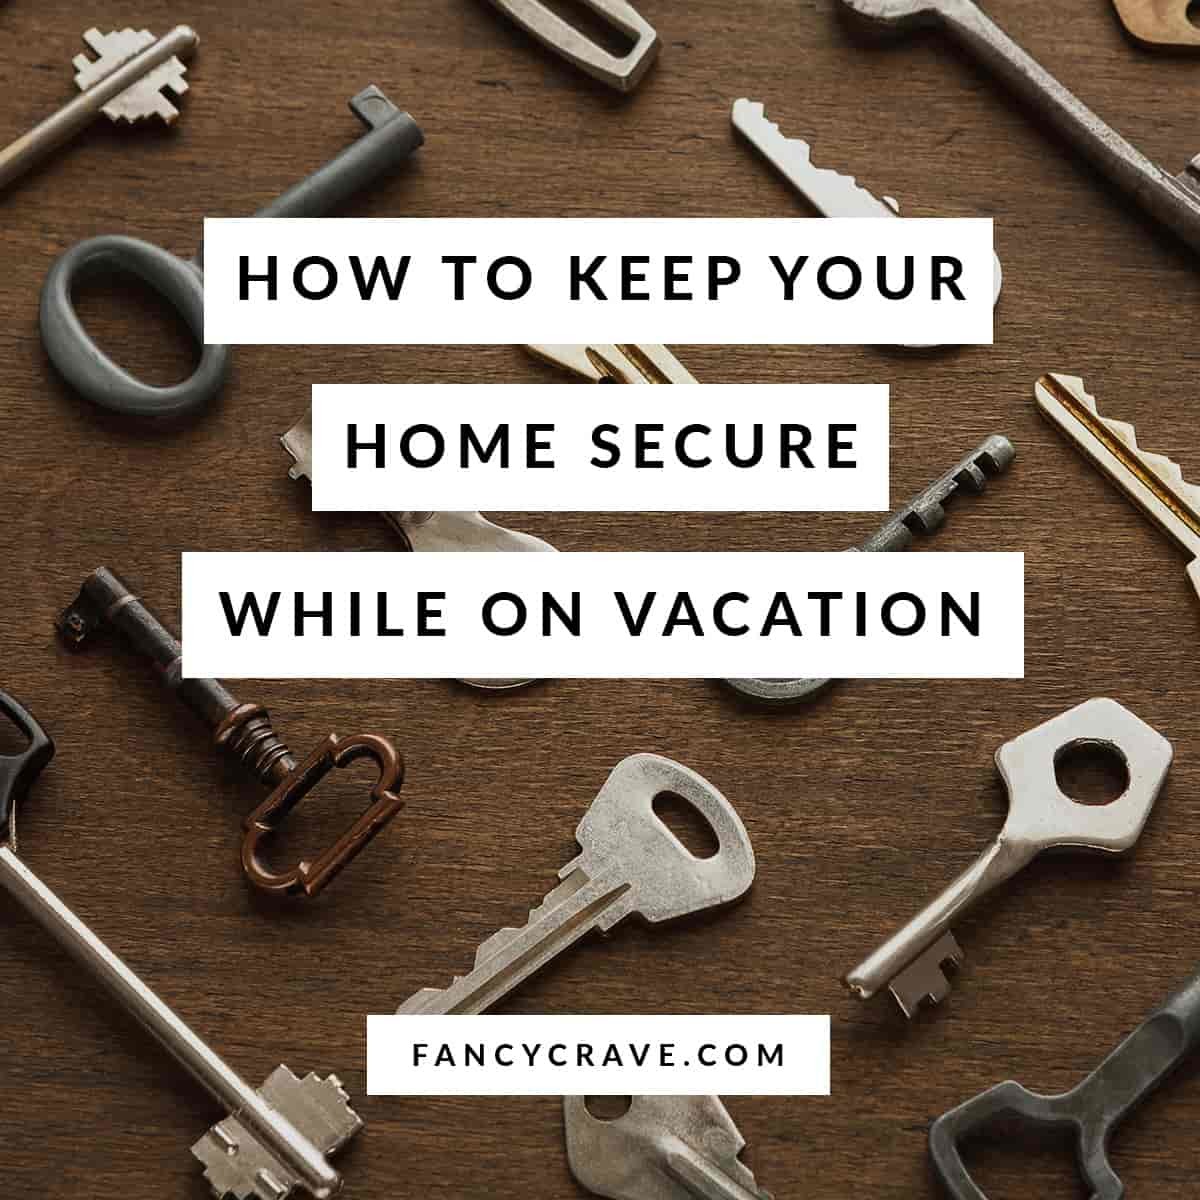 How to Keep Your Home Secure